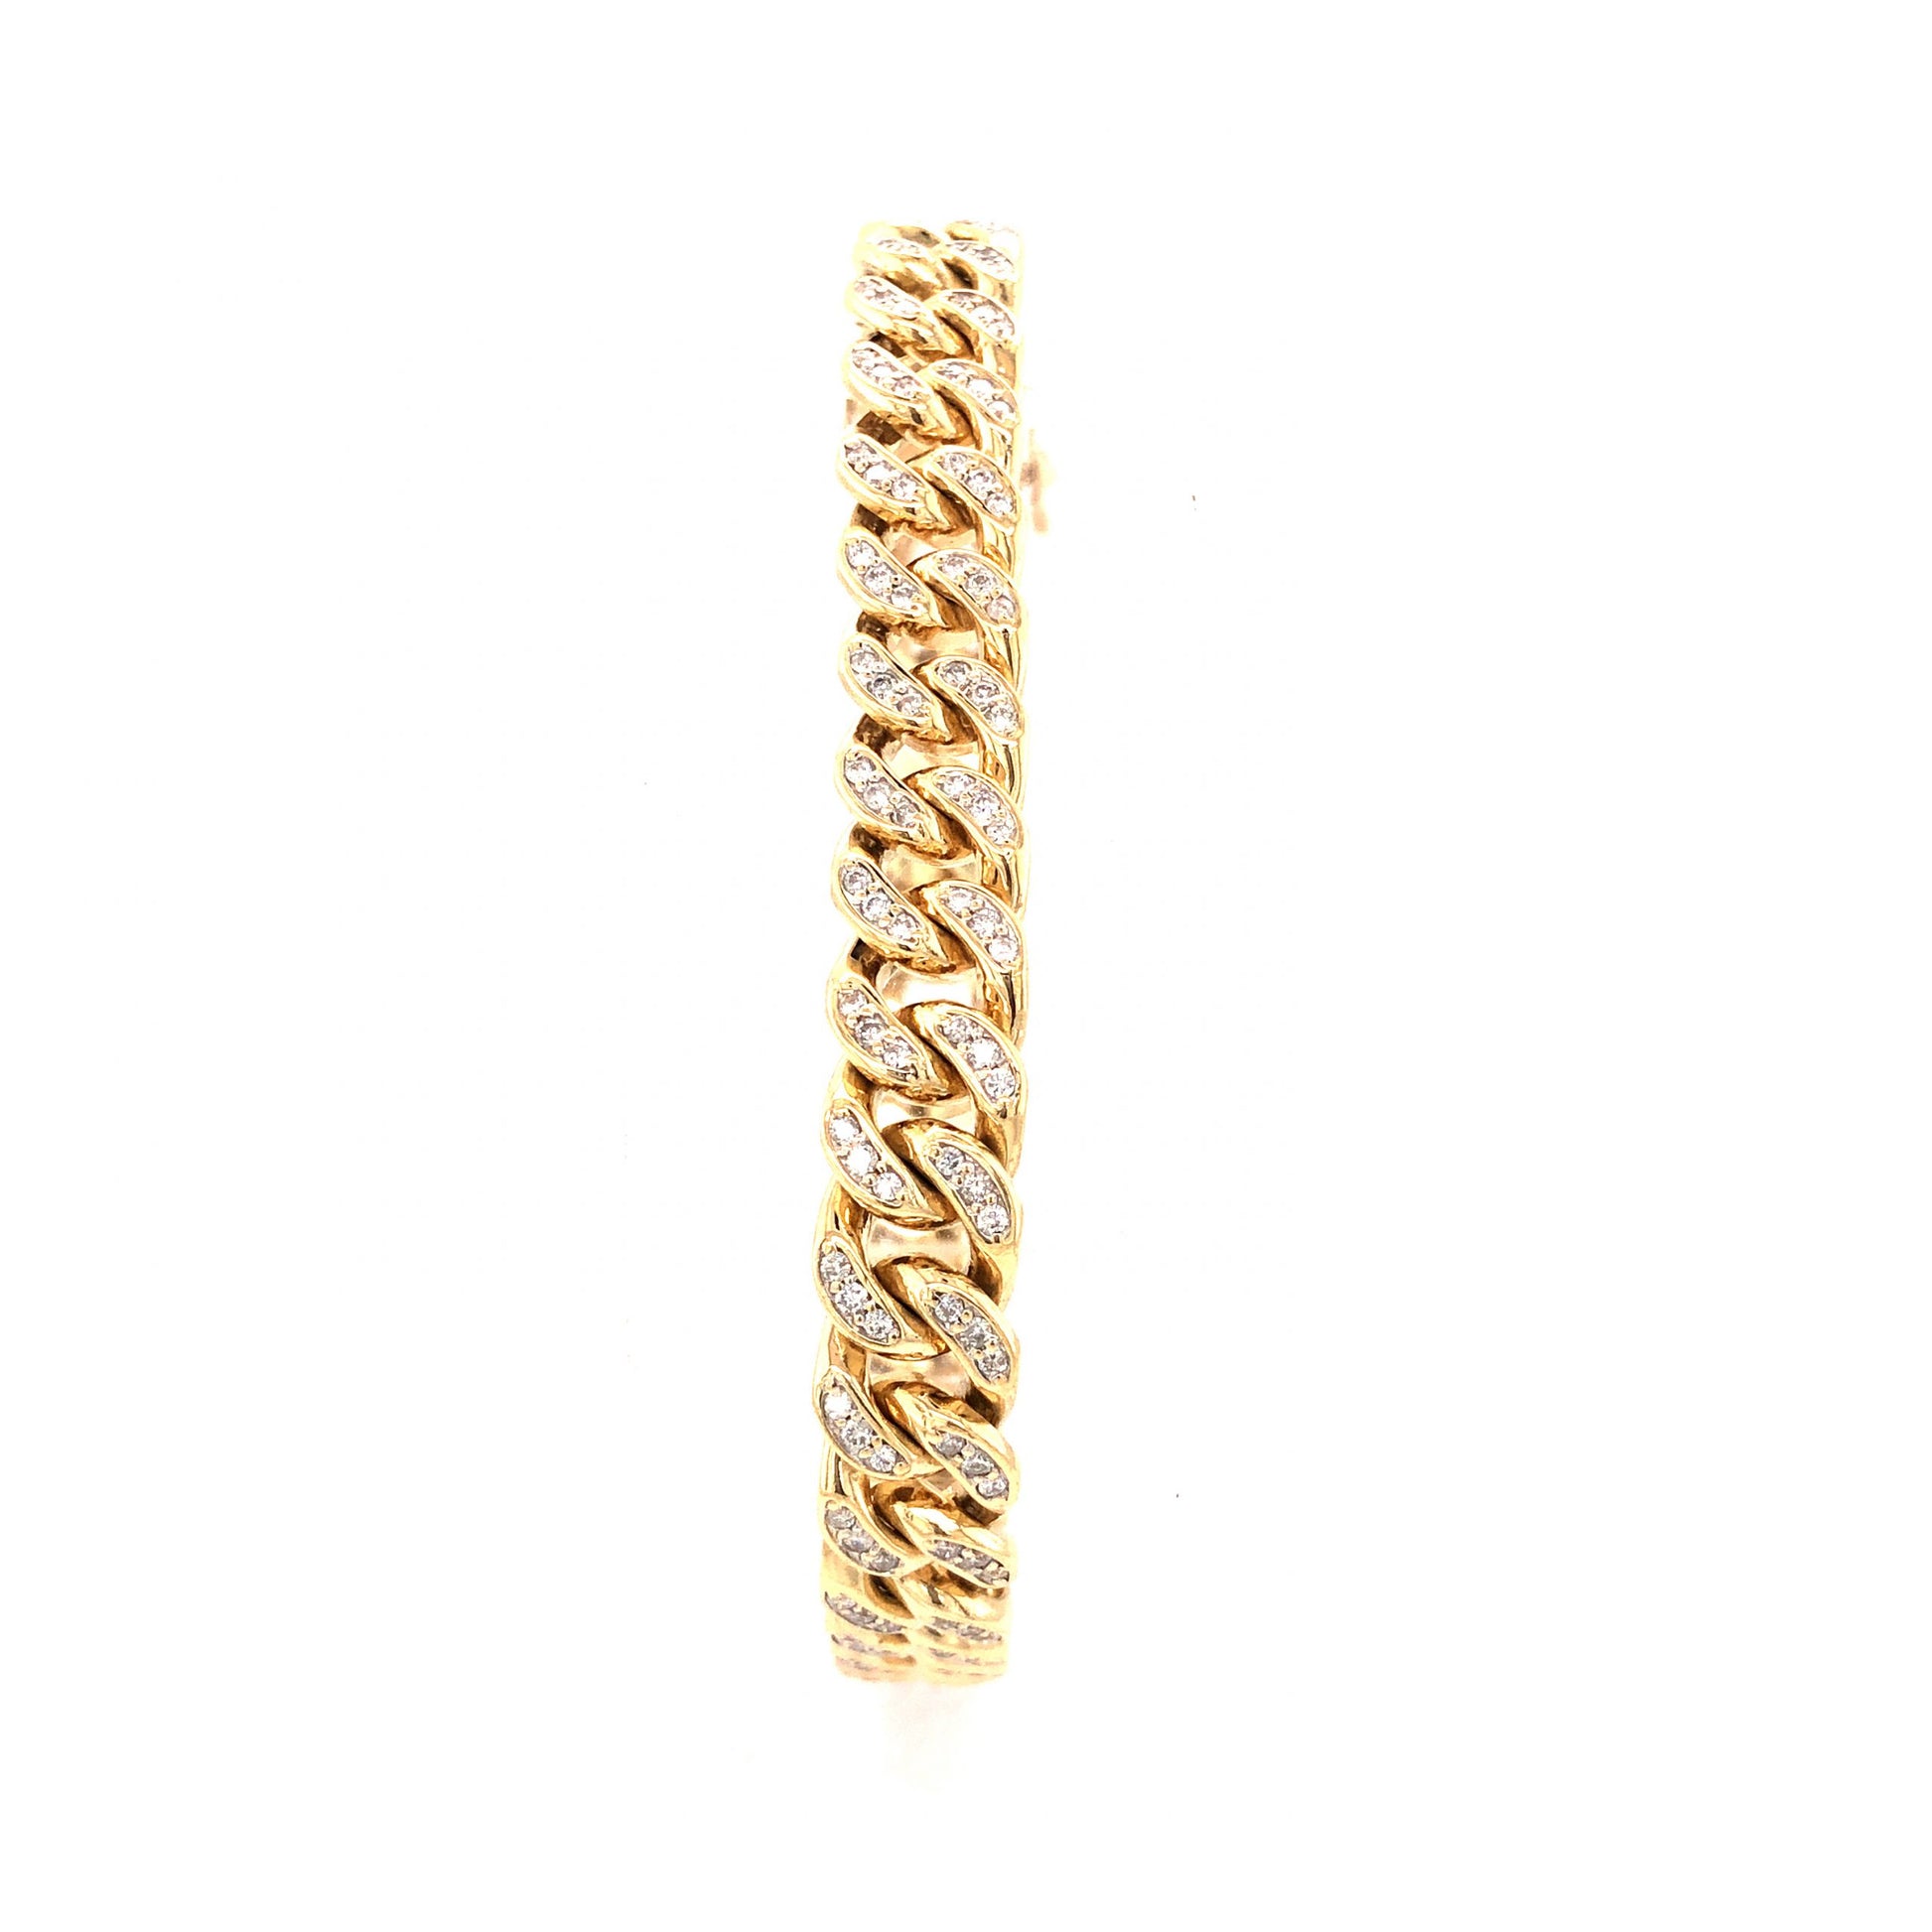 Pave Diamond Chain Link Bracelet in 14k Yellow GoldComposition: PlatinumTotal Diamond Weight: 2.16 ctTotal Gram Weight: 39.4 gInscription: 14k CAL